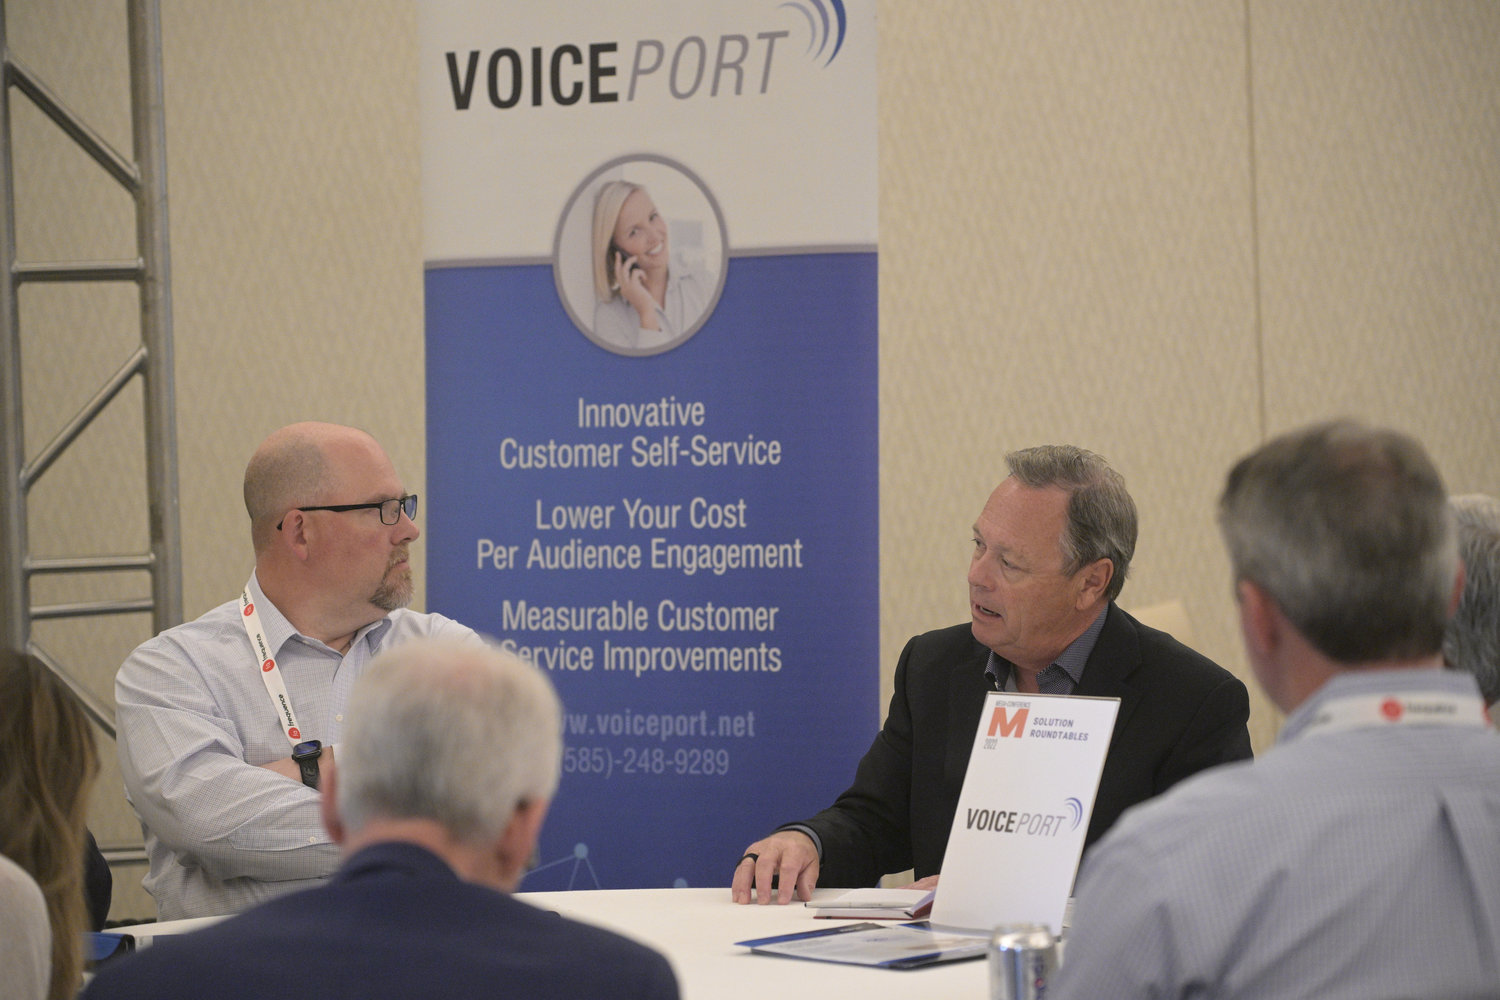 Another topic at the VoicePort table: Addressing your "open routes without swamping your call center." (Photo by Phelan M. Ebenhack)